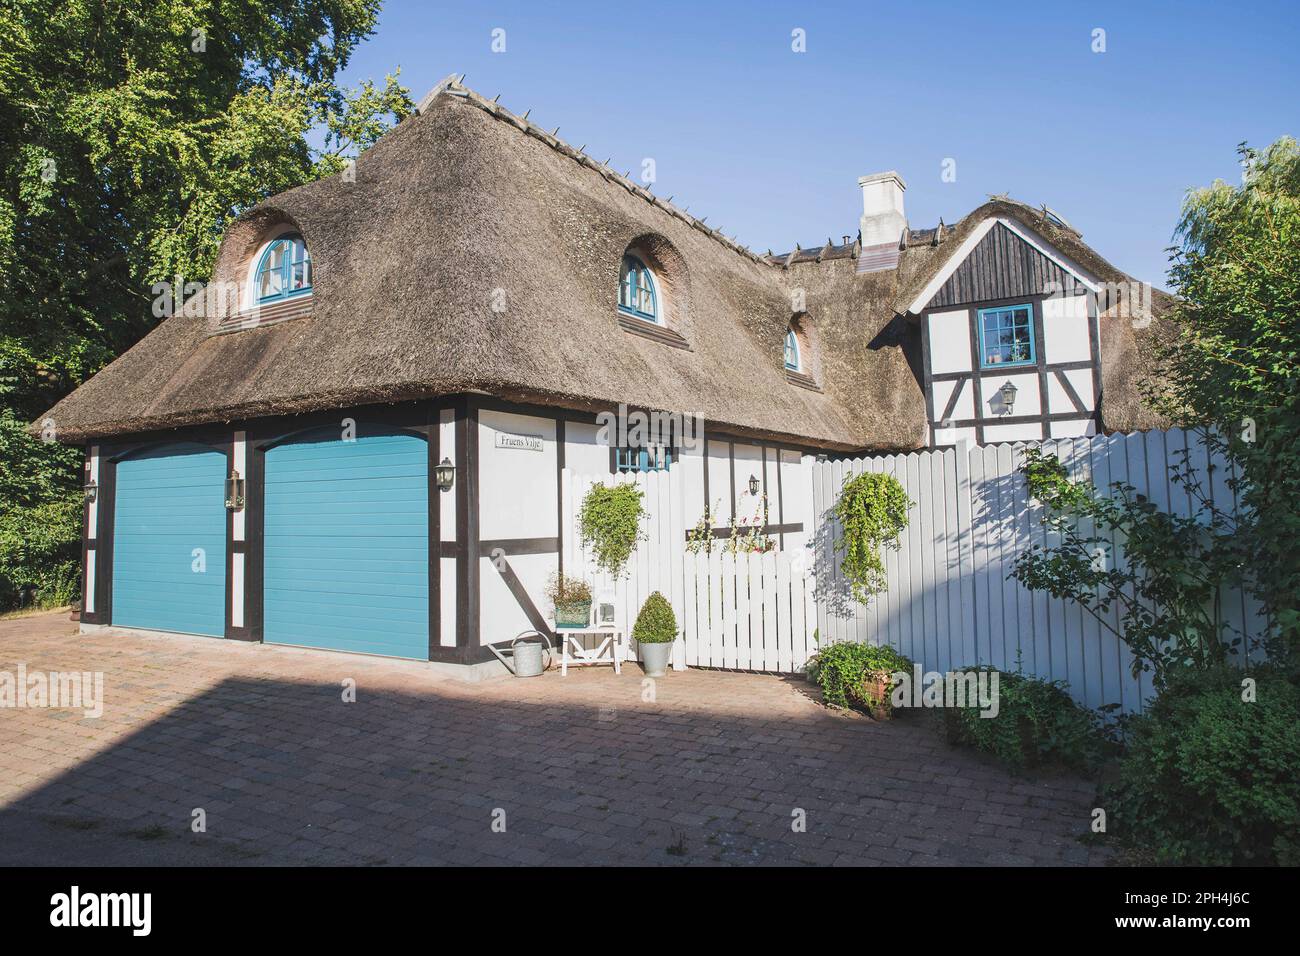 Charming house with thatched roof in Denmark Stock Photo